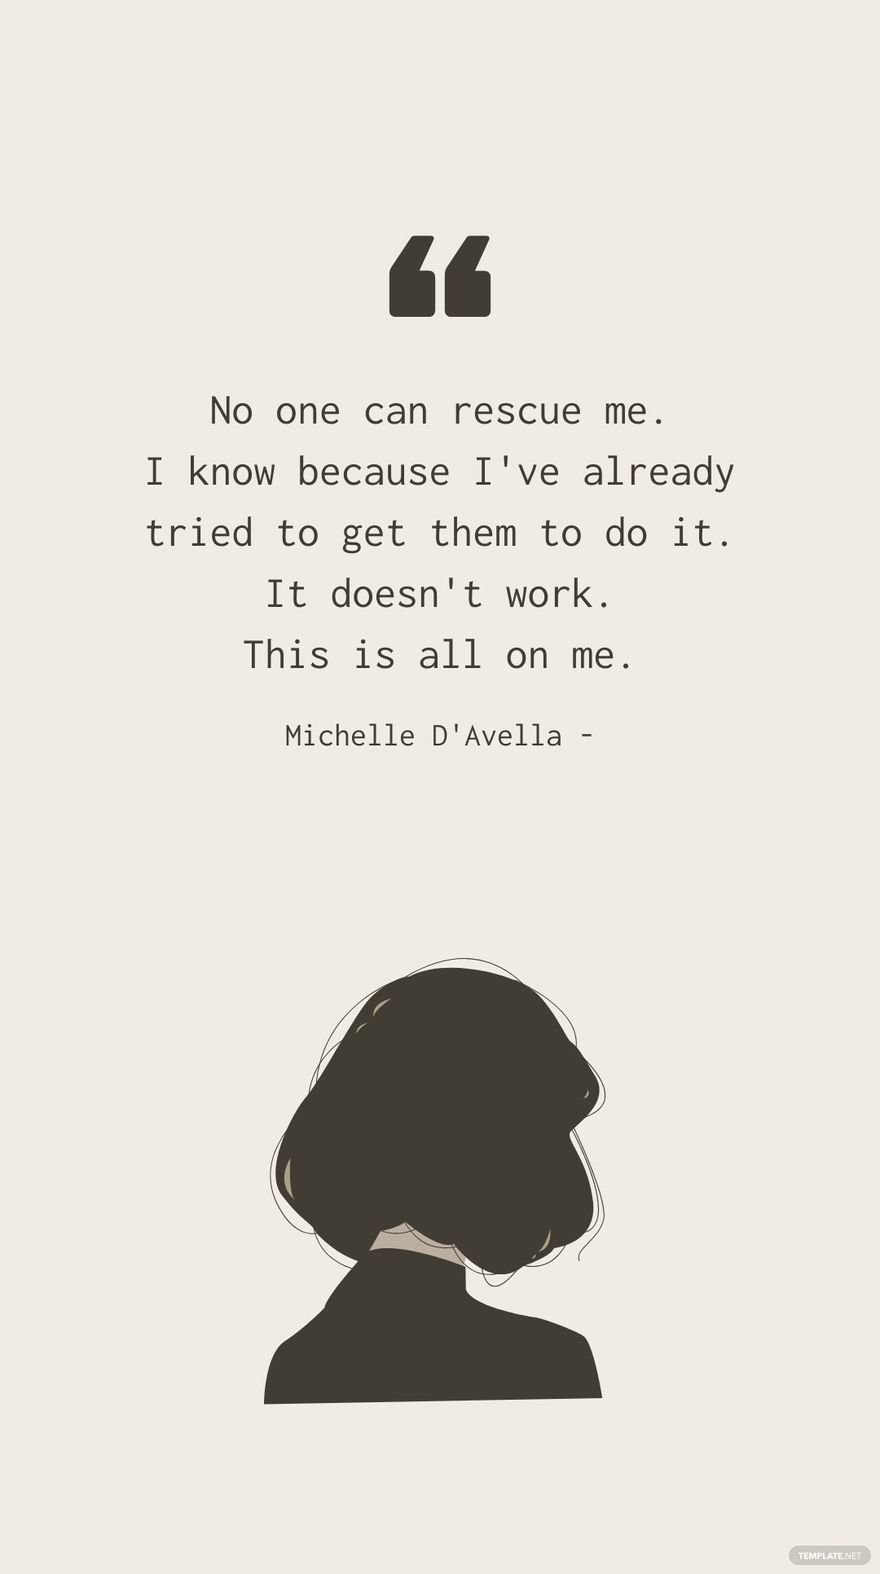 Free Michelle D'Avella - No one can rescue me. I know because I've already tried to get them to do it. It doesn't work. This is all on me.